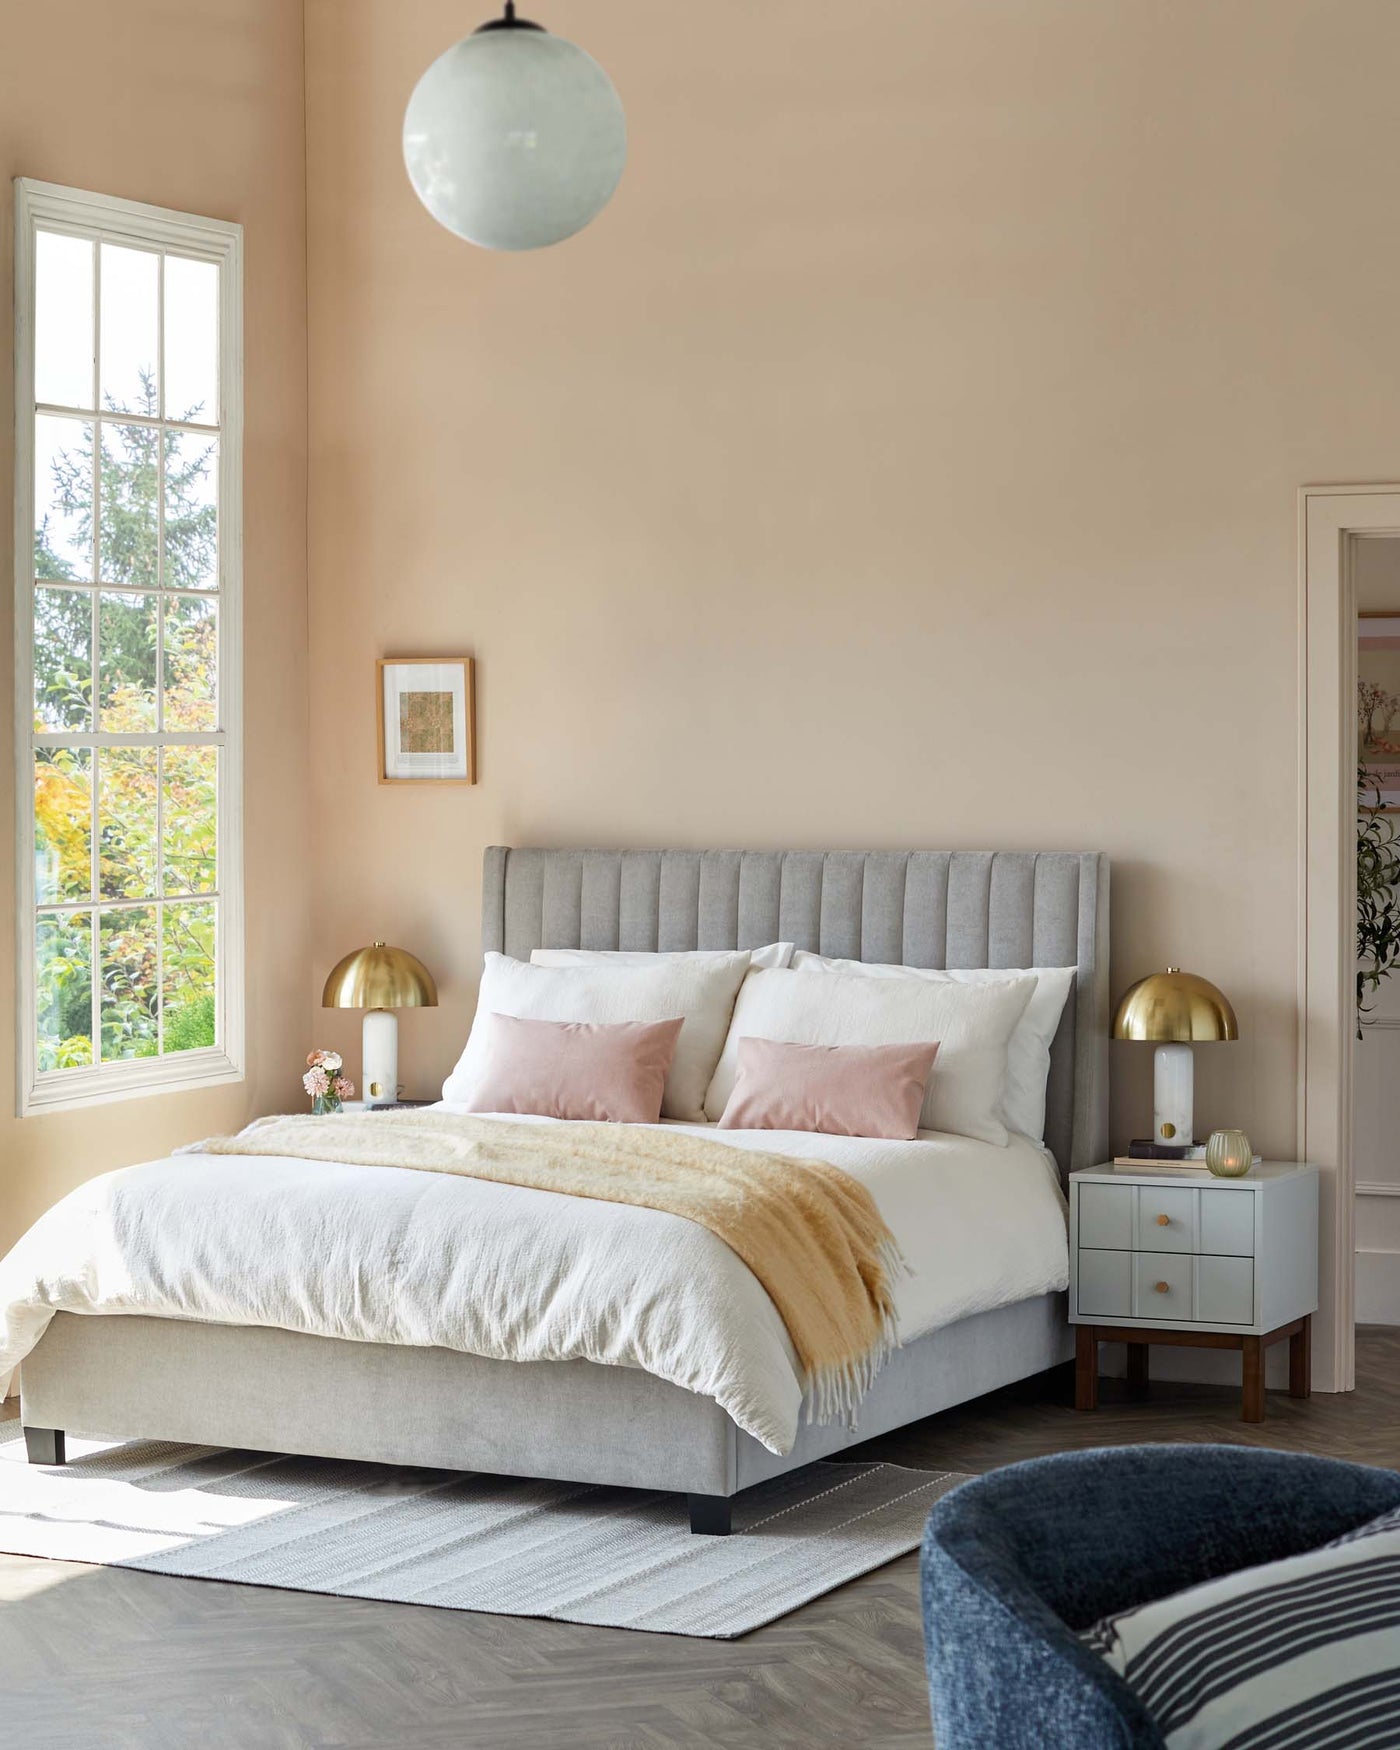 Elegant bedroom setup featuring a grey upholstered king-sized bed with a tufted headboard, accented with white and pale pink bedding and a plush beige throw. Beside the bed is a white two-drawer nightstand with wooden legs, topped with a golden lamp. A striped grey and white area rug lies partially under the bed, complementing a navy blue upholstered chair with white piping in the foreground.